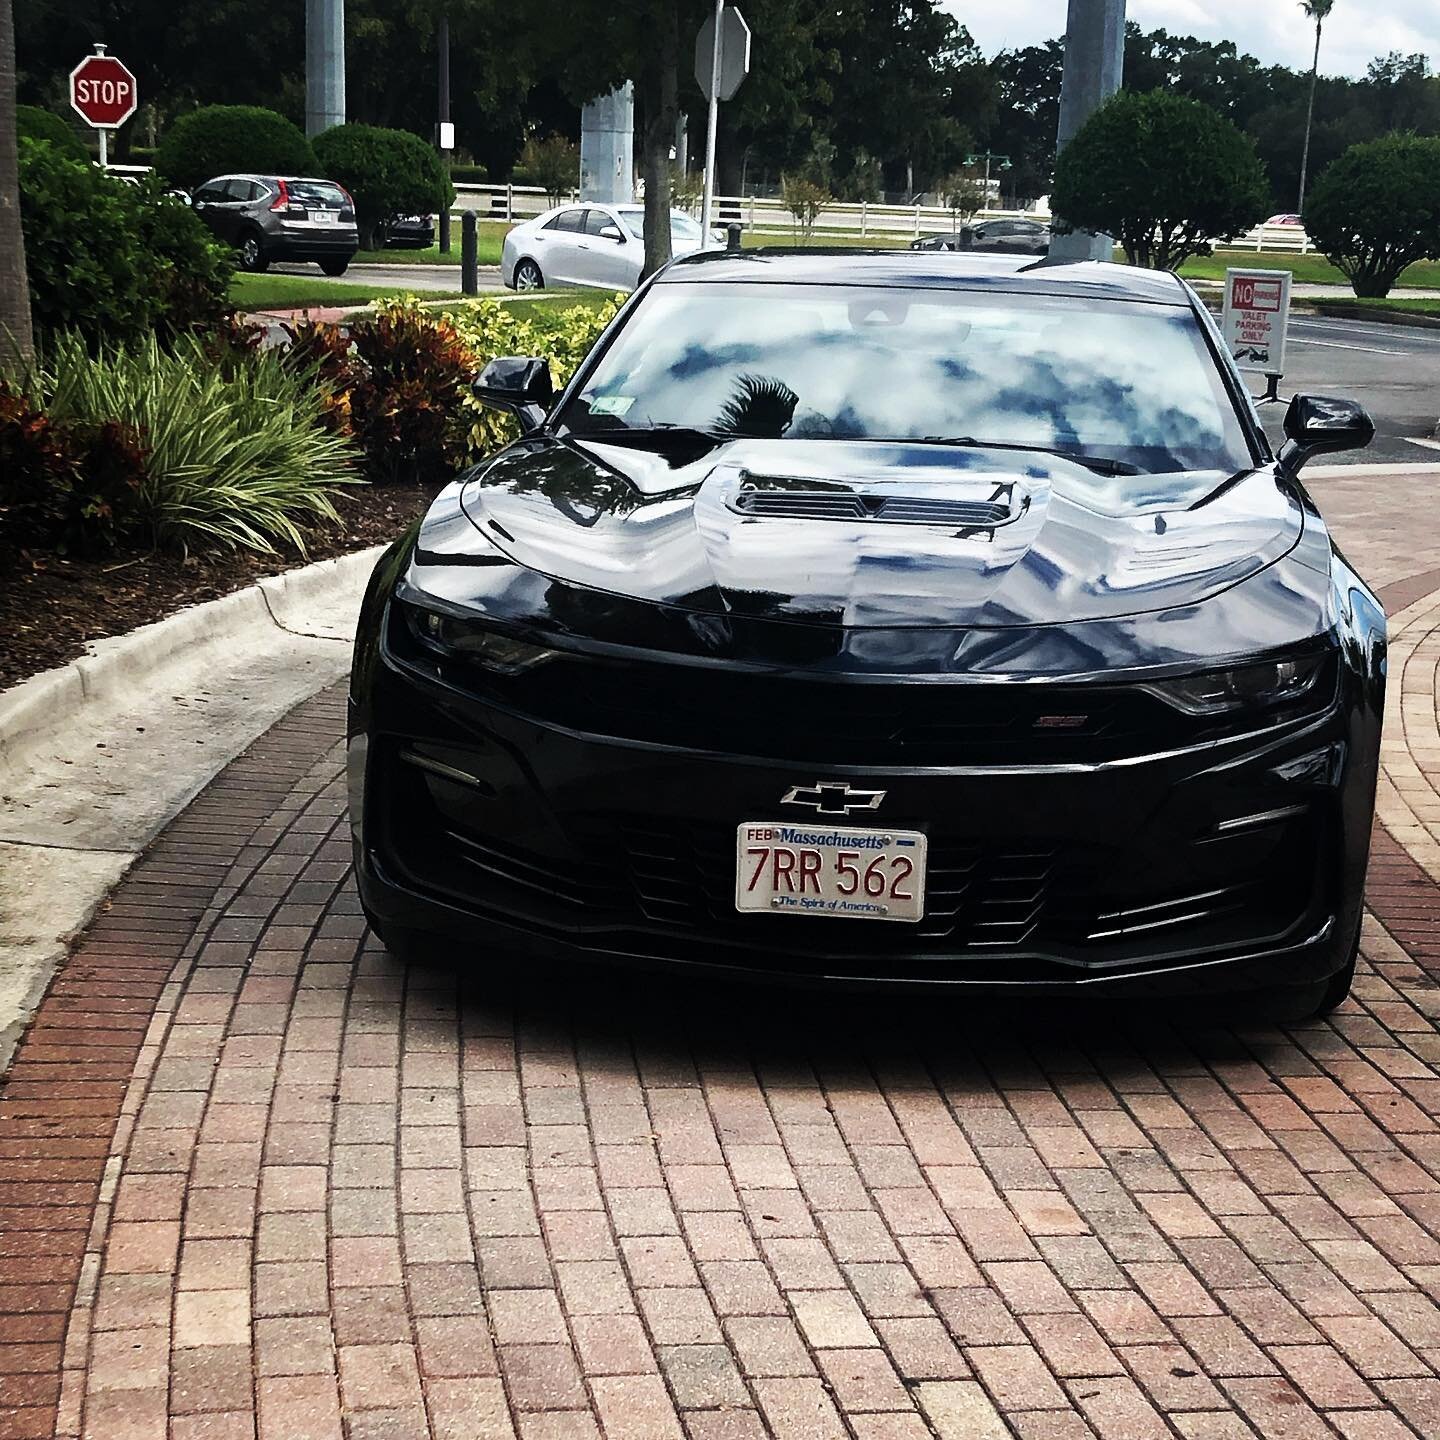 #mood #VacationRide. One of my favorites.. This car is so mean 😠😎We literally got stopped on the street at least 5 times in two days to talk about it! 
.
.
.
#chevy #camaro #vacationvision #vibes #tes #thesuitelife